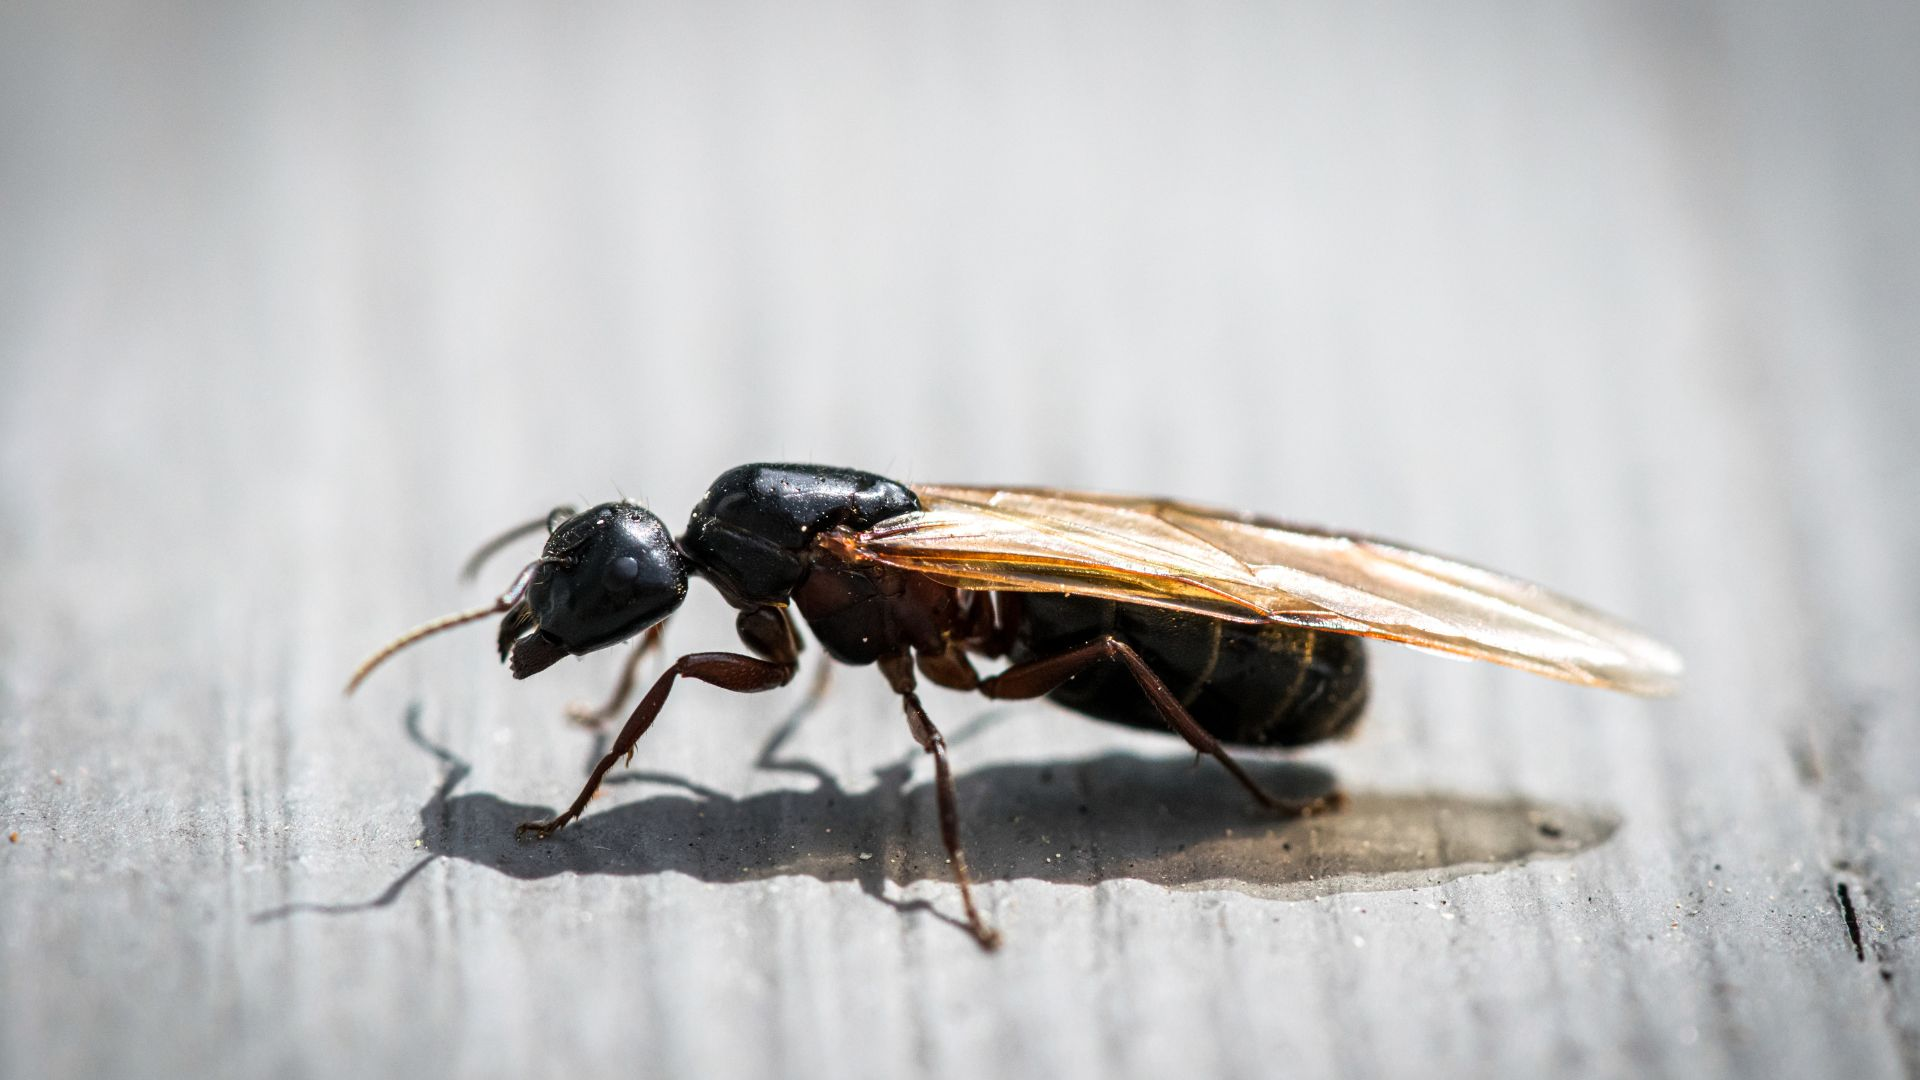 An image of a flying ant on a gray wooden surface.